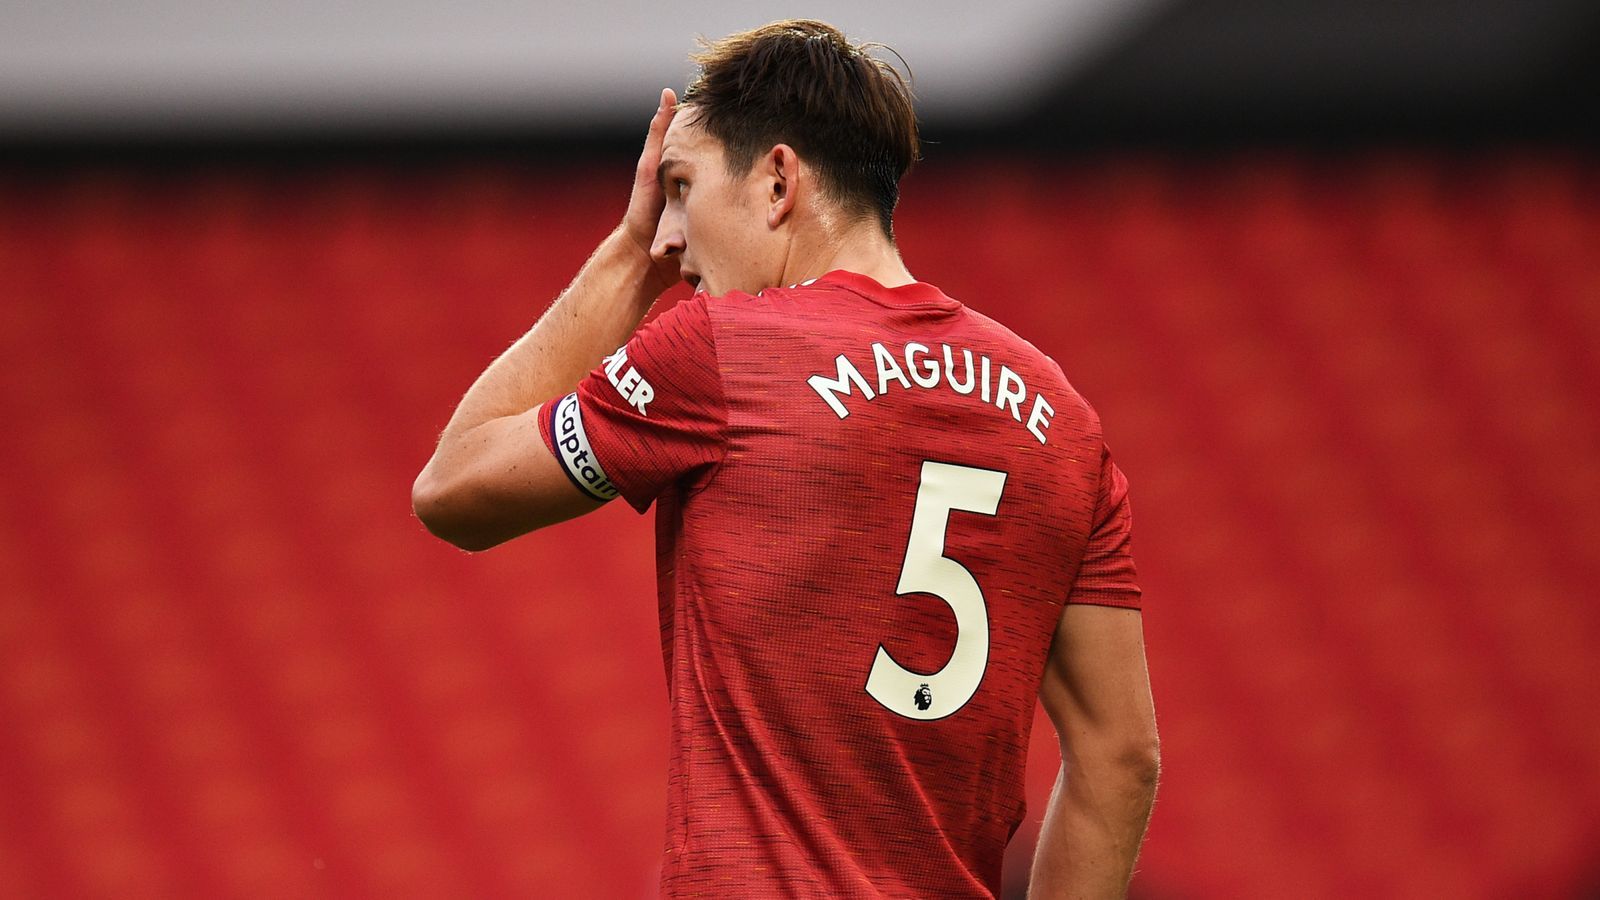 Download wallpapers 4K Harry Maguire grunge art Manchester United FC  english footballers Premier League red abstract rays Jacob Harry Maguire  soccer football Man United Harry Maguire 4K for desktop free Pictures  for